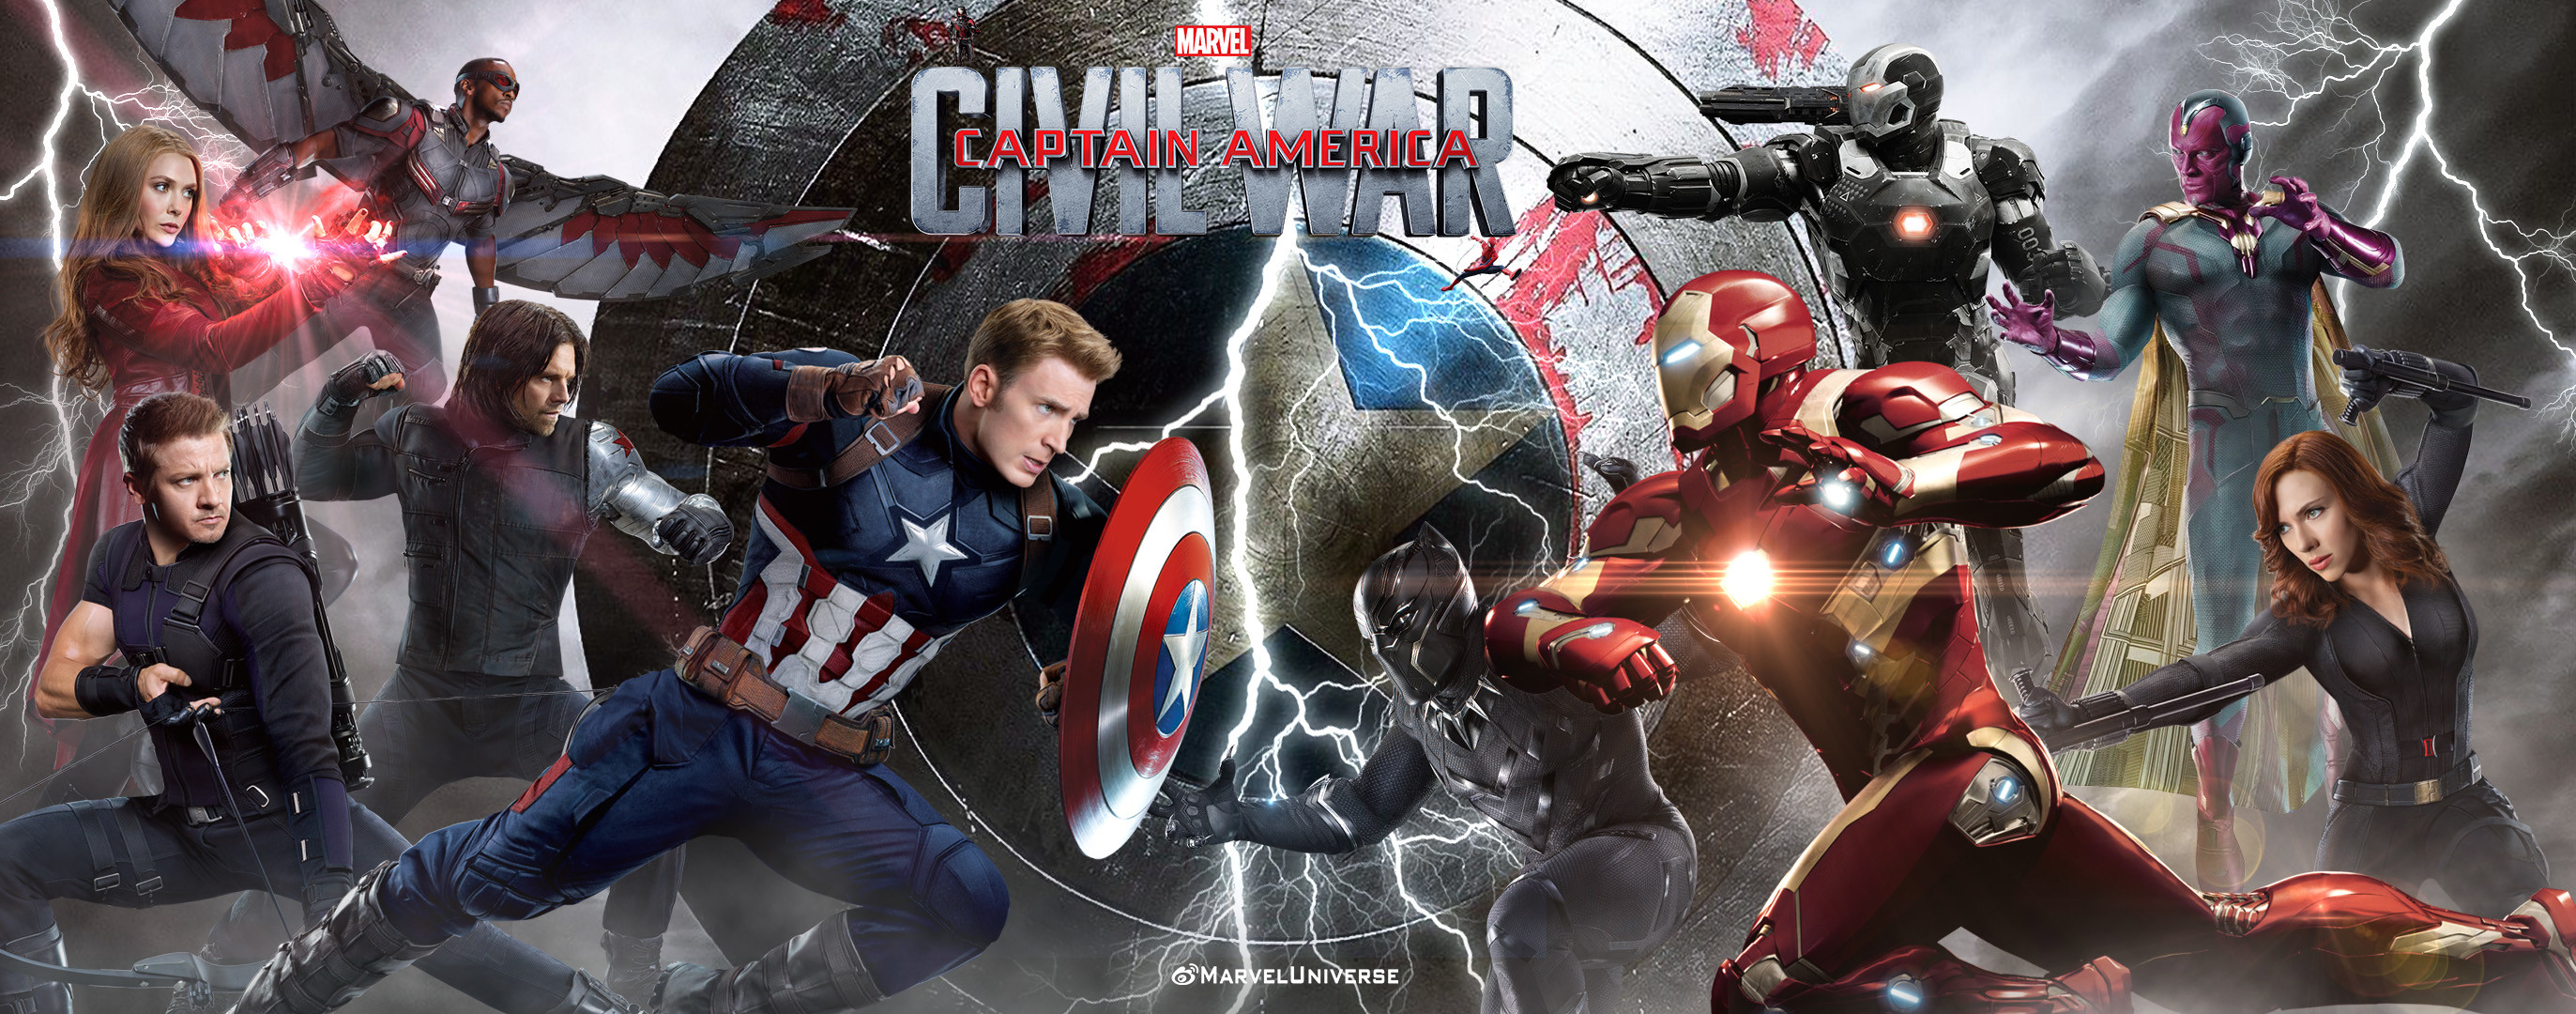 2745x1080 Captain America Civil War wallpapers by Chenshijie9095 Captain America Civil  War wallpapers by Chenshijie9095